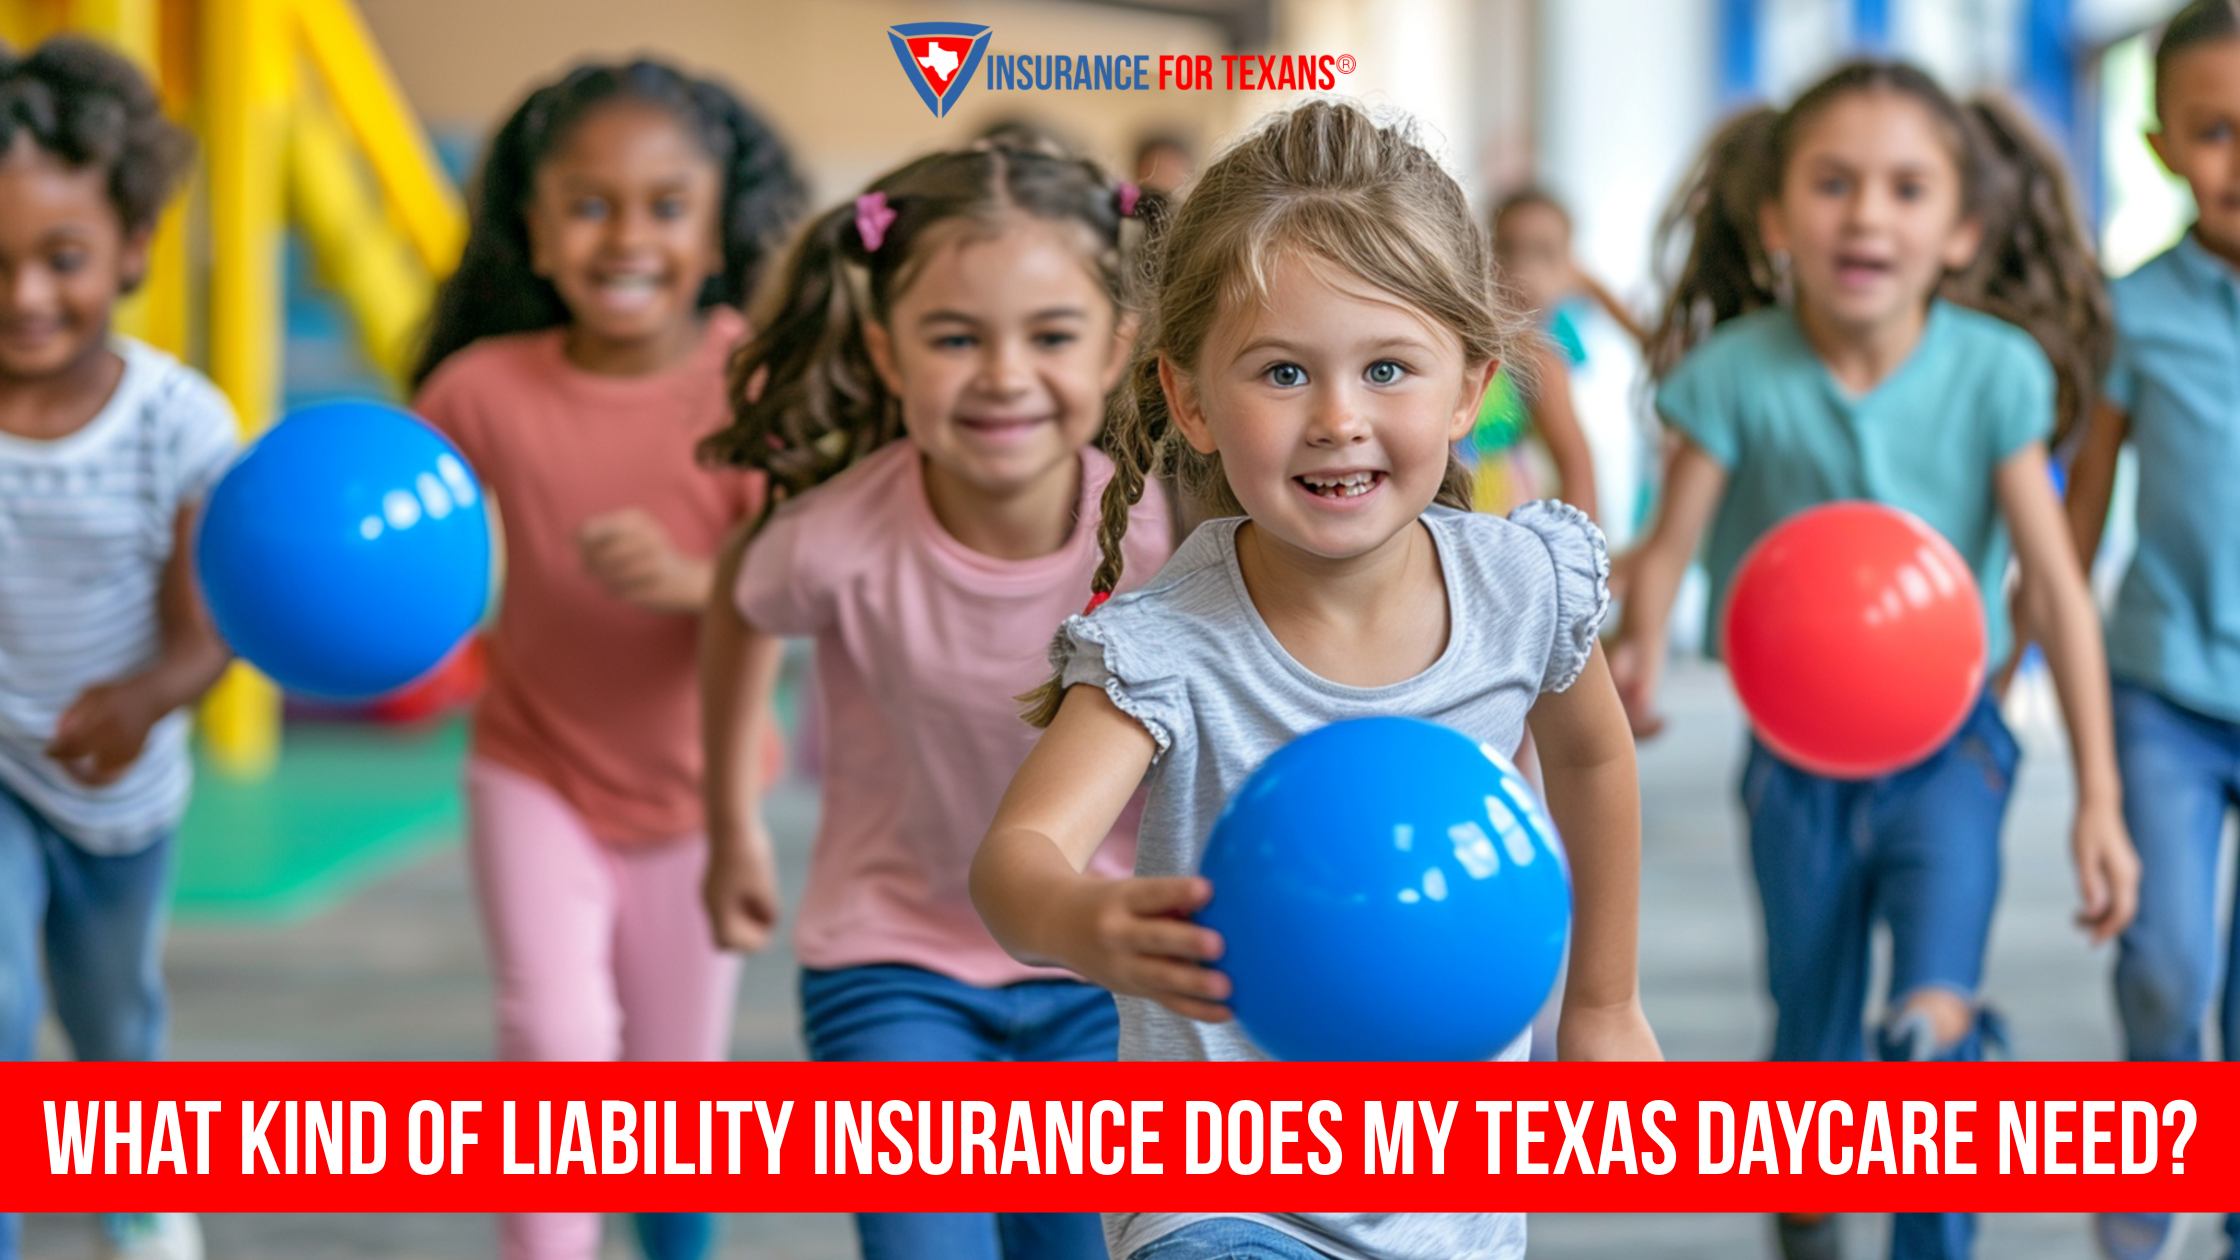 What Kind of Liability Insurance Does My Texas Daycare Need?